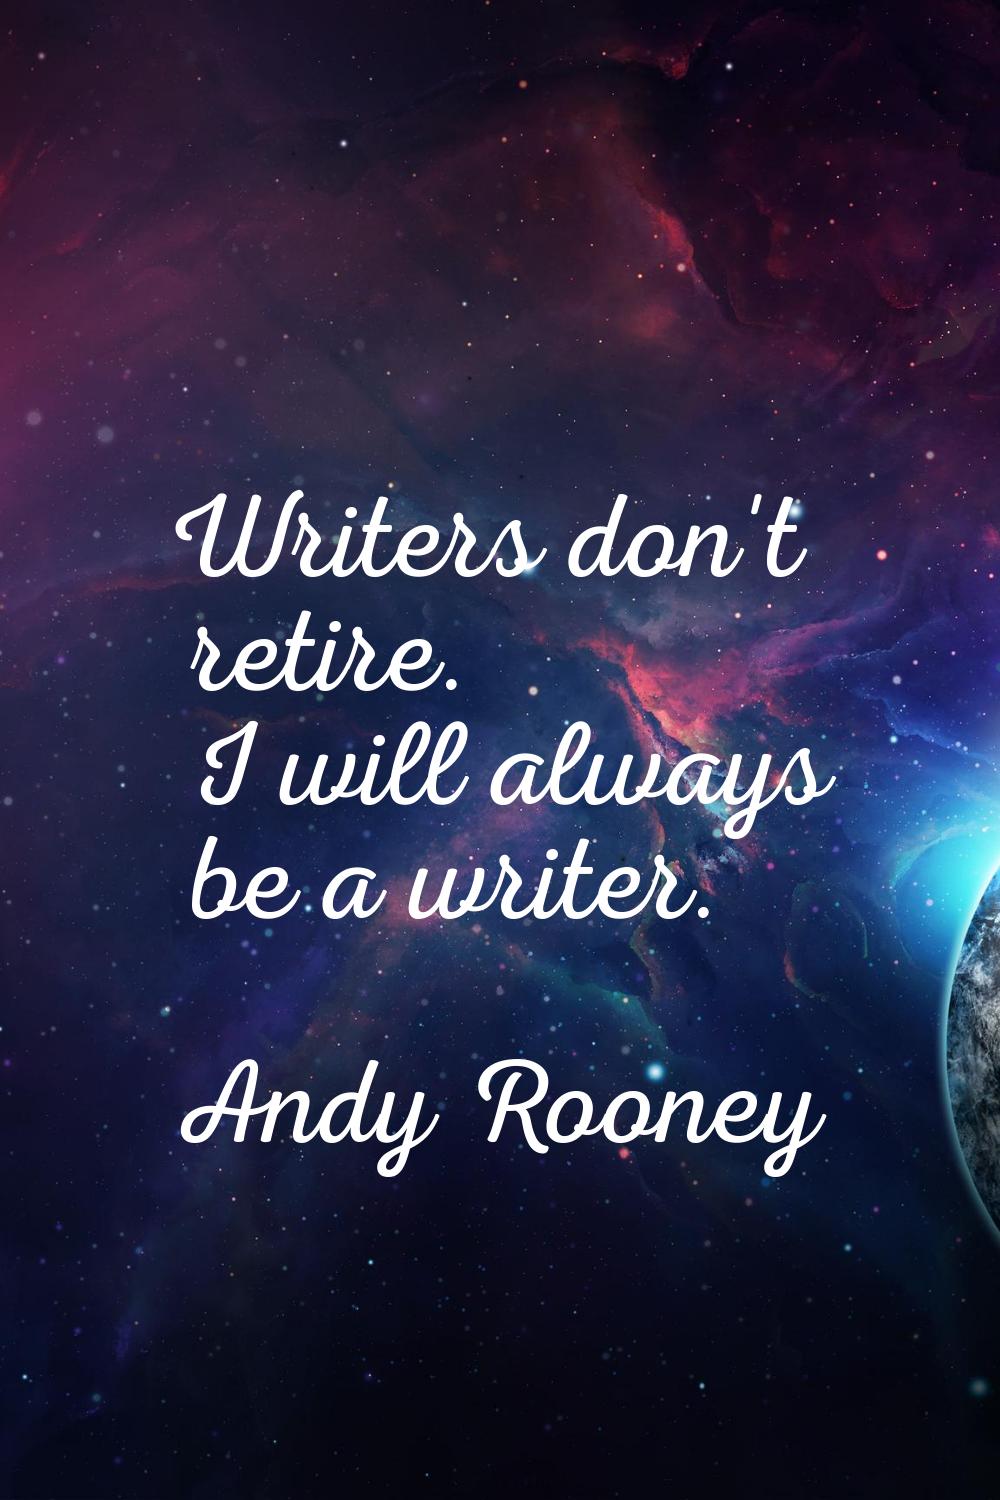 Writers don't retire. I will always be a writer.